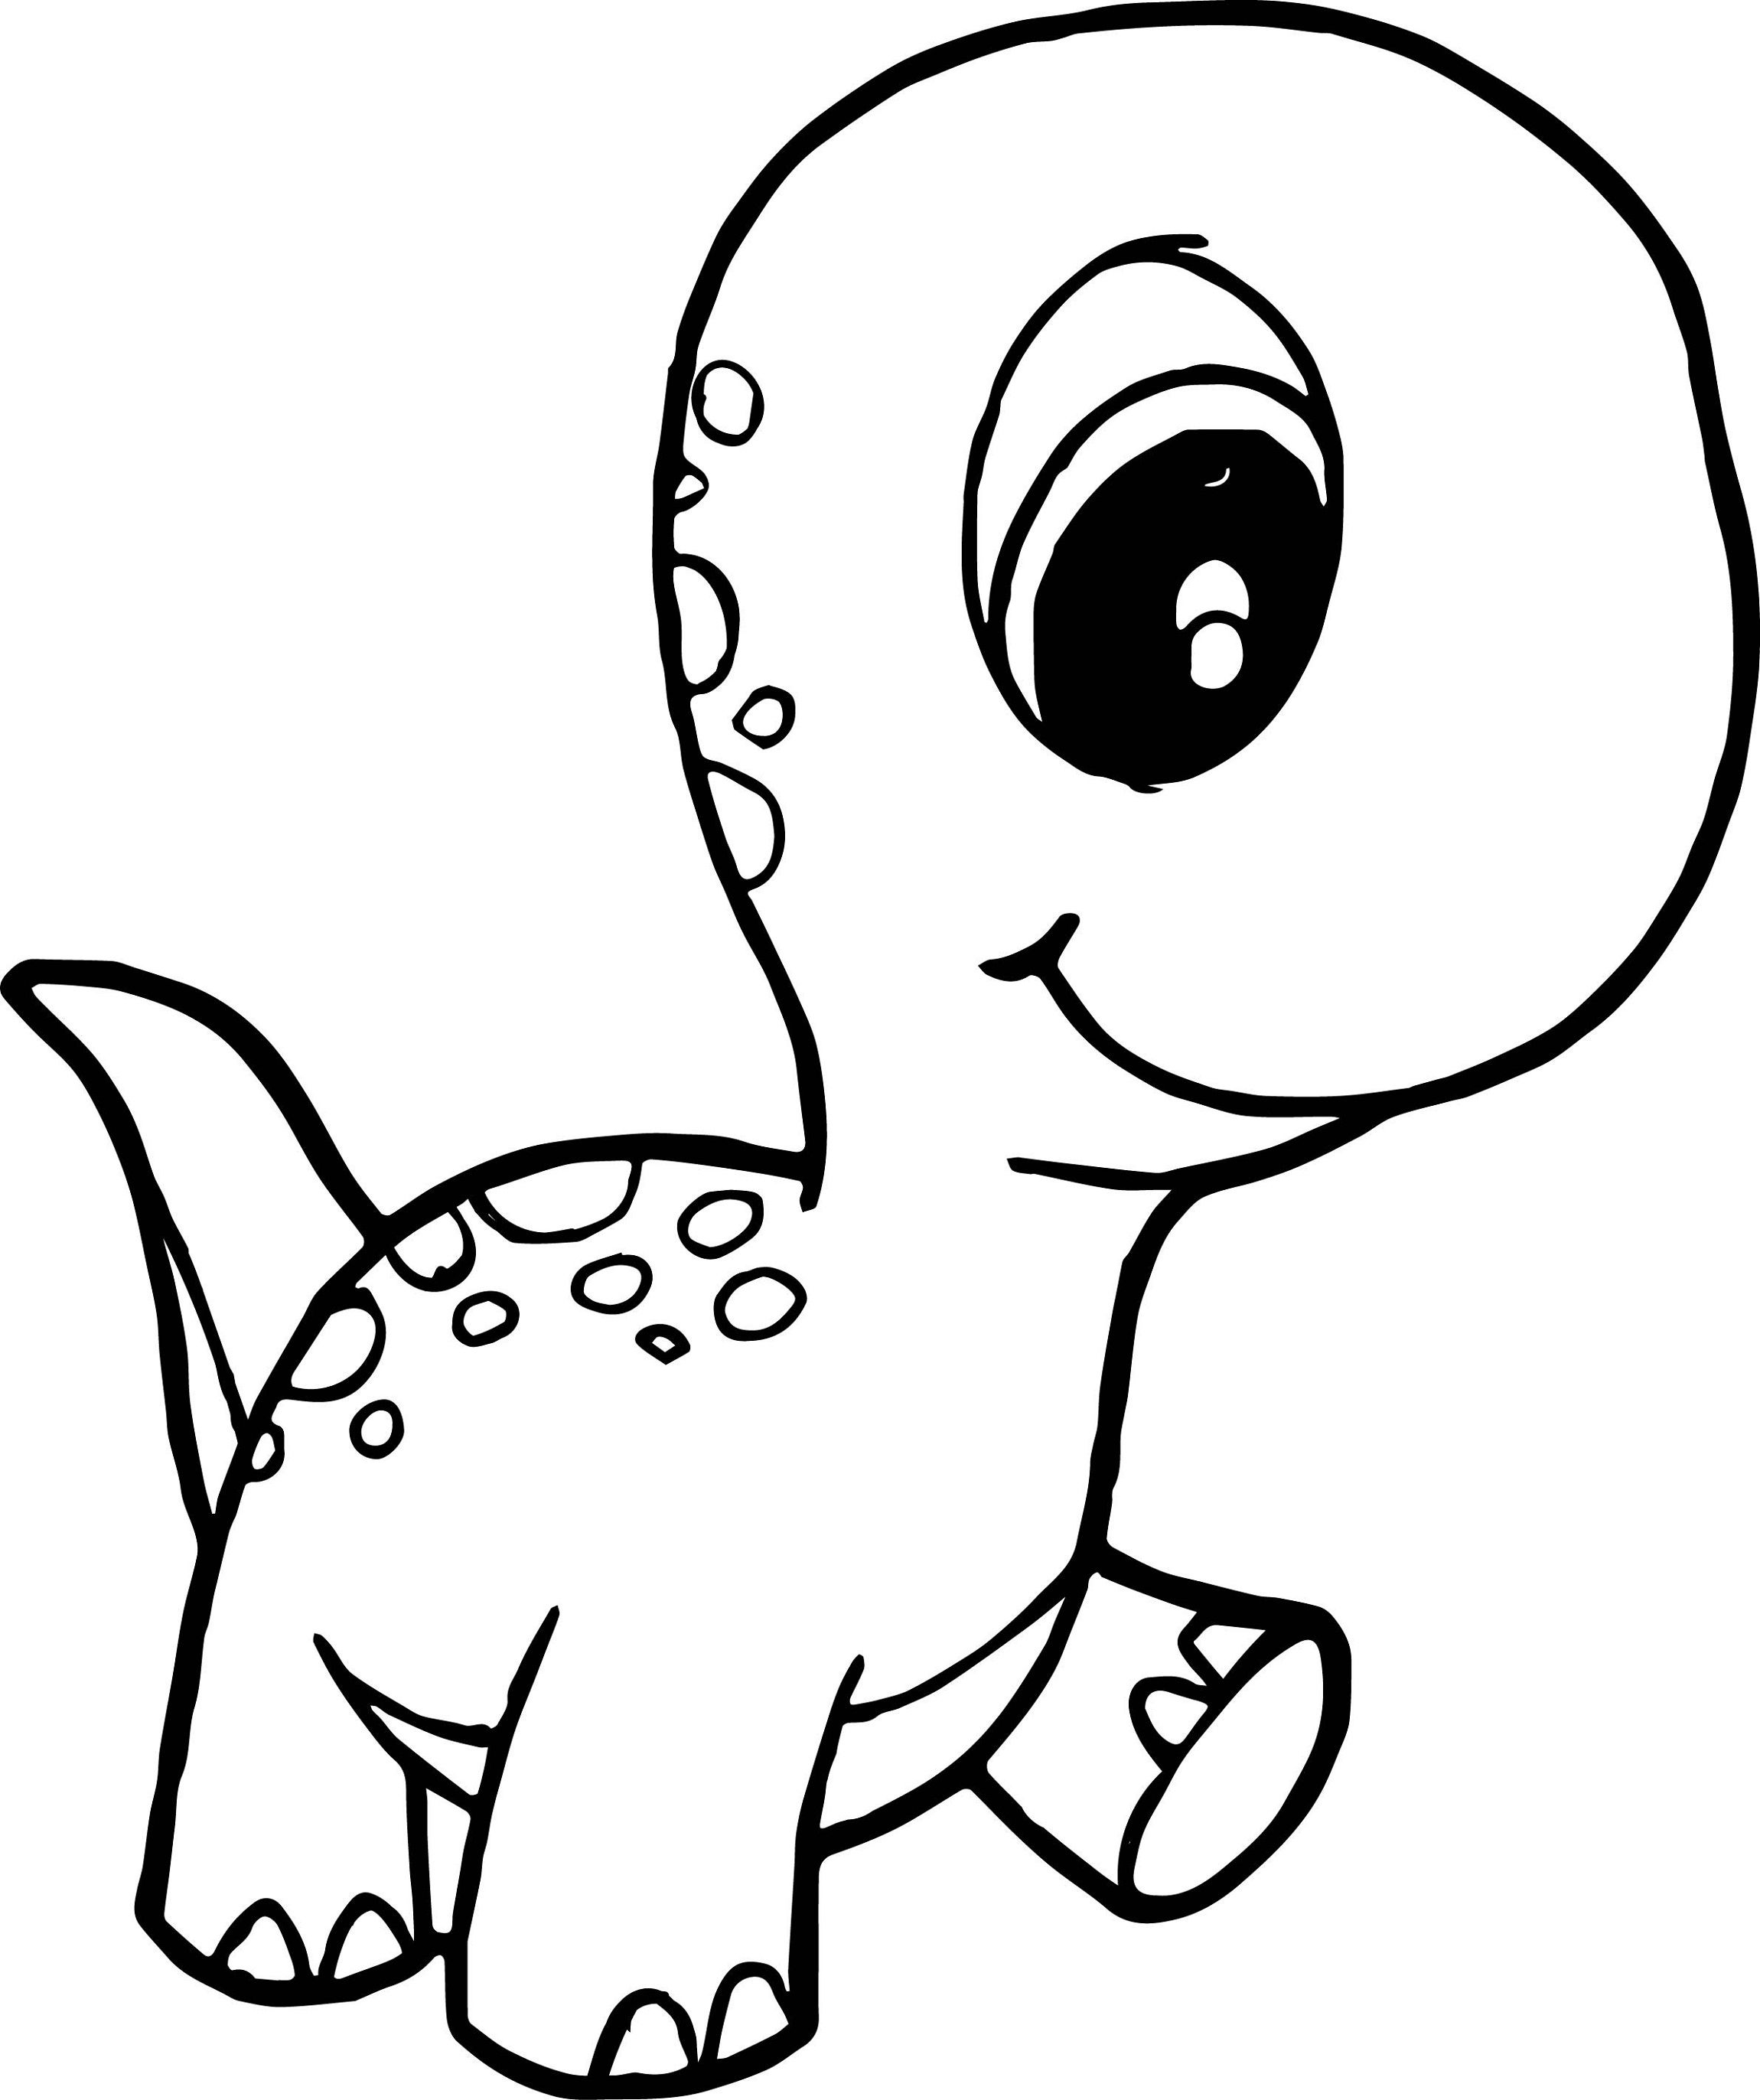 Baby Dinosaur Coloring Pages for Preschoolers